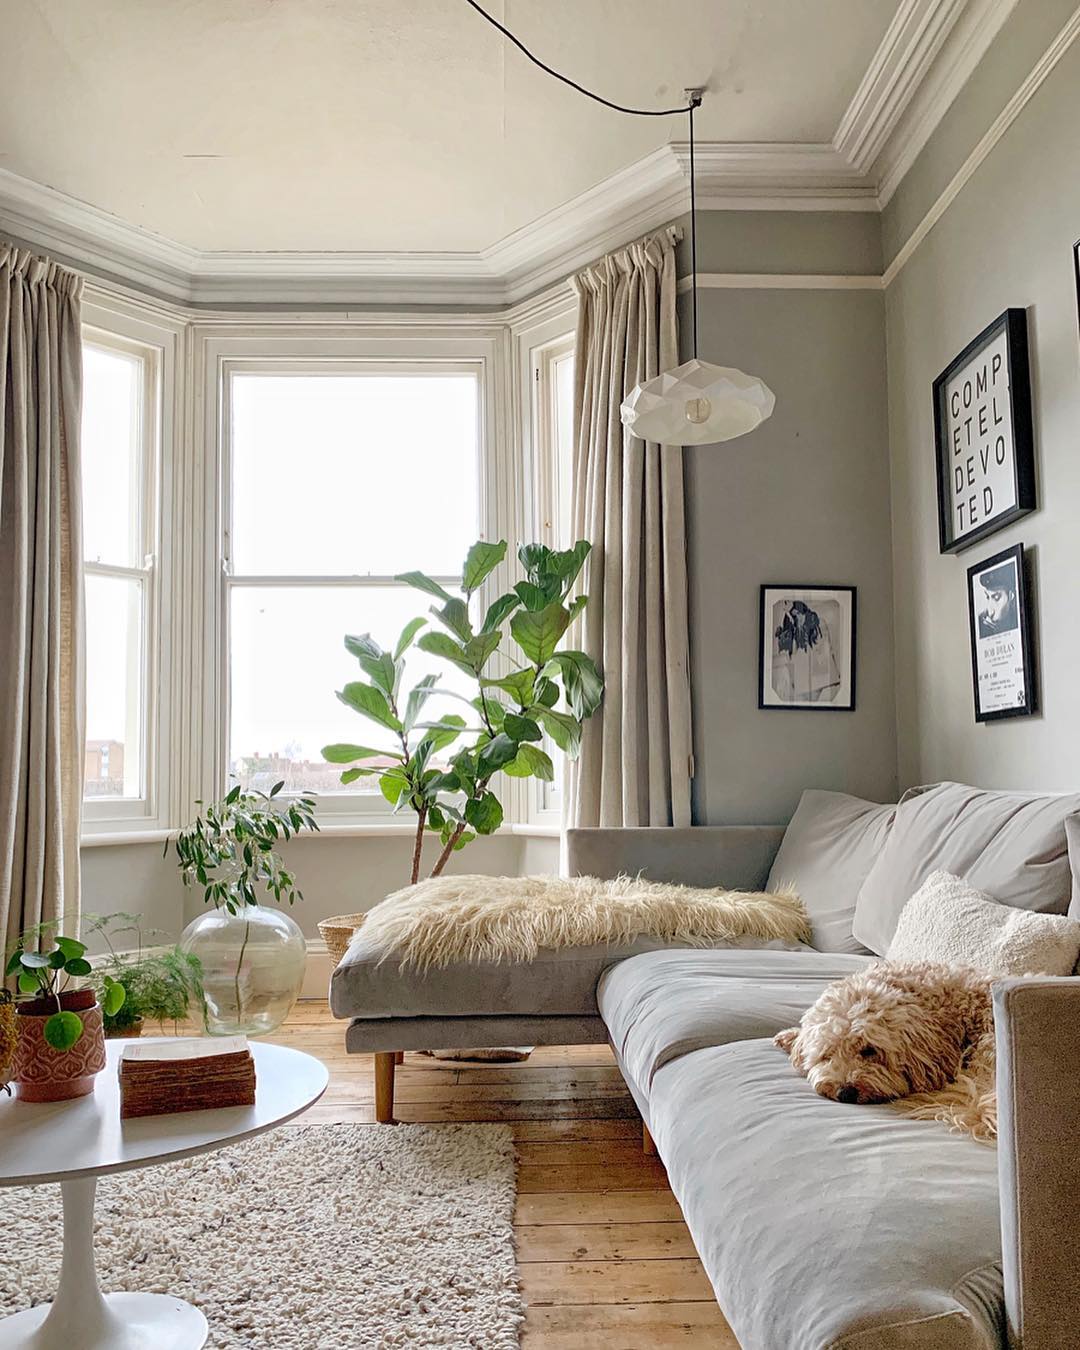 Living Room with Couch, Plants, and Photos. Photo by Instagram user @deecampling.